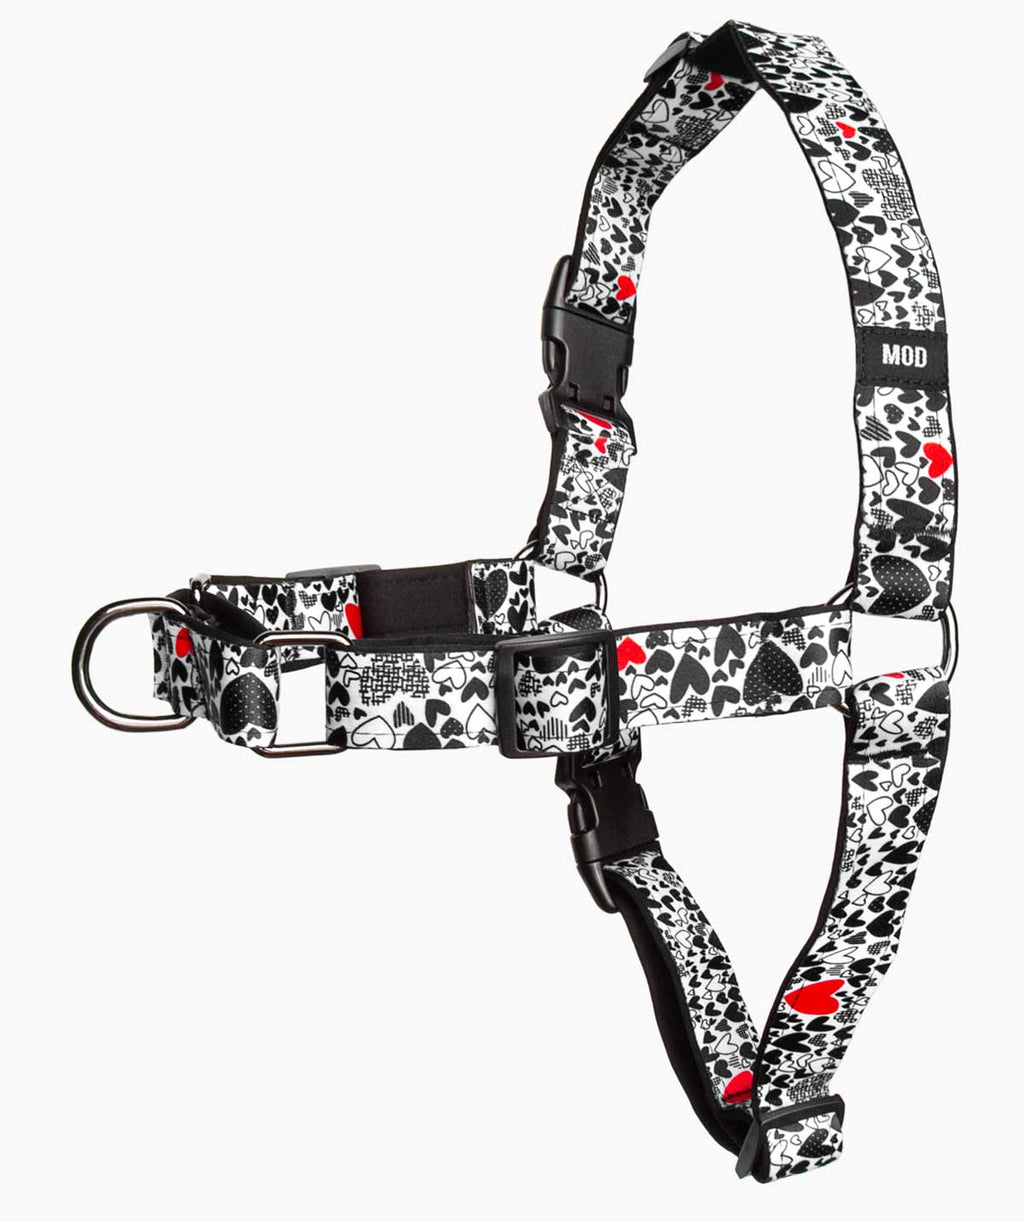 Stronger Together No-Pull Harness - A Side - MODLEASH